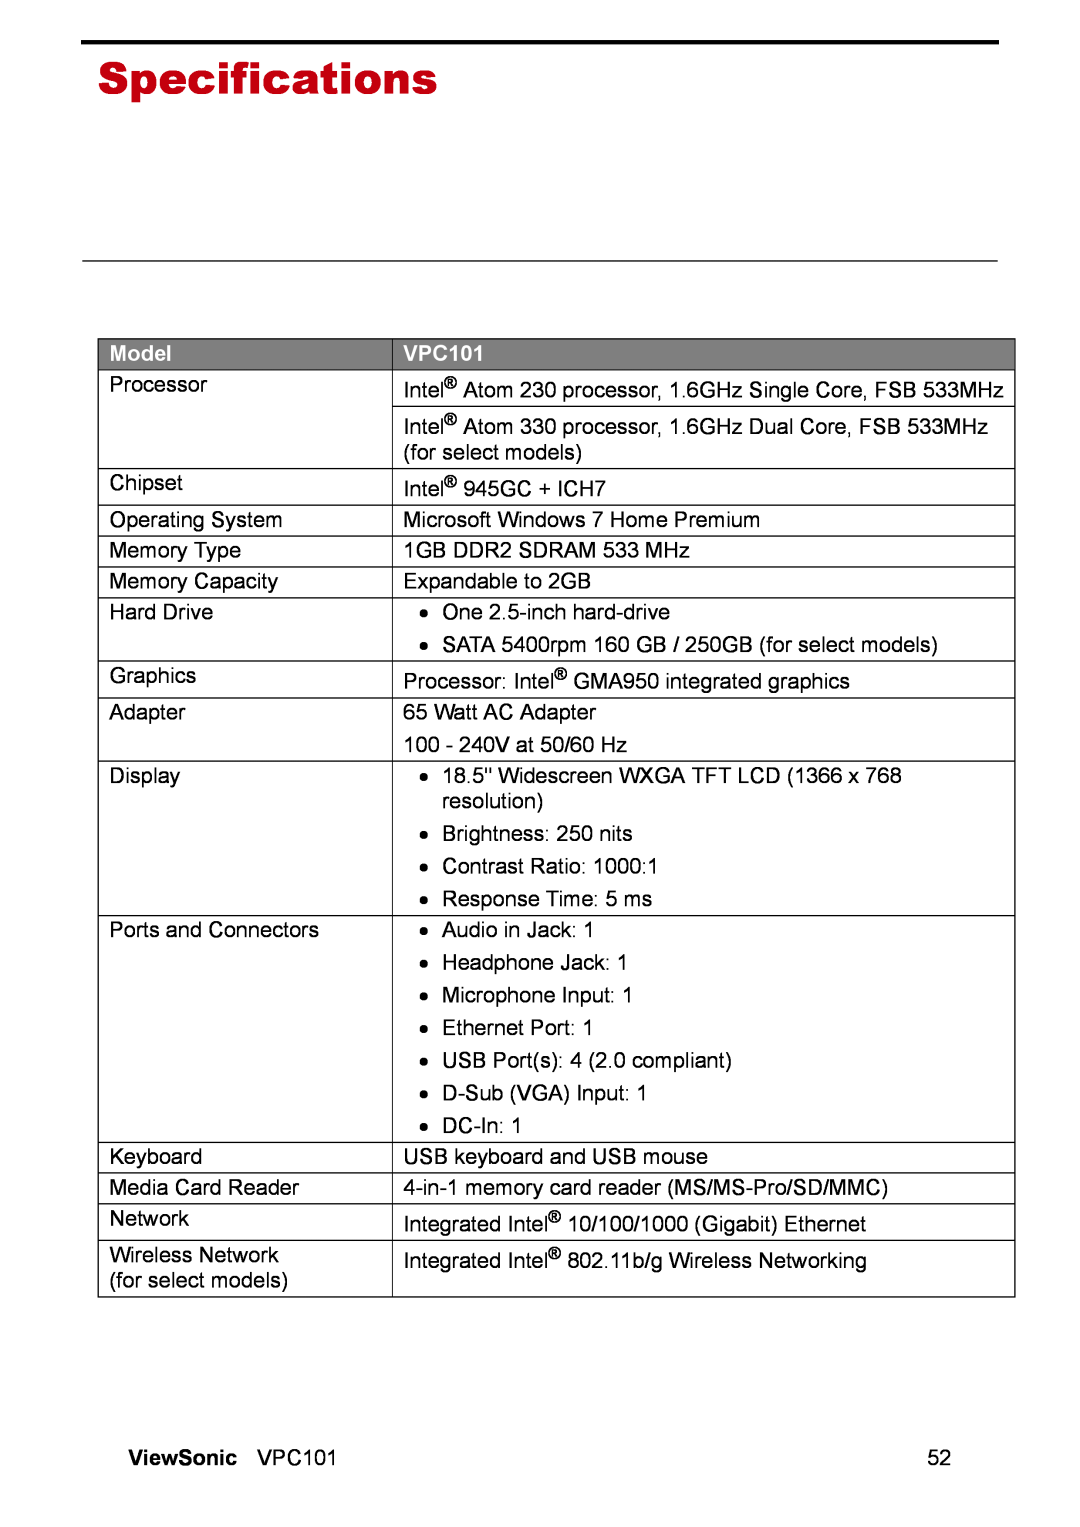 ViewSonic VPC101 manual Specifications, Model 